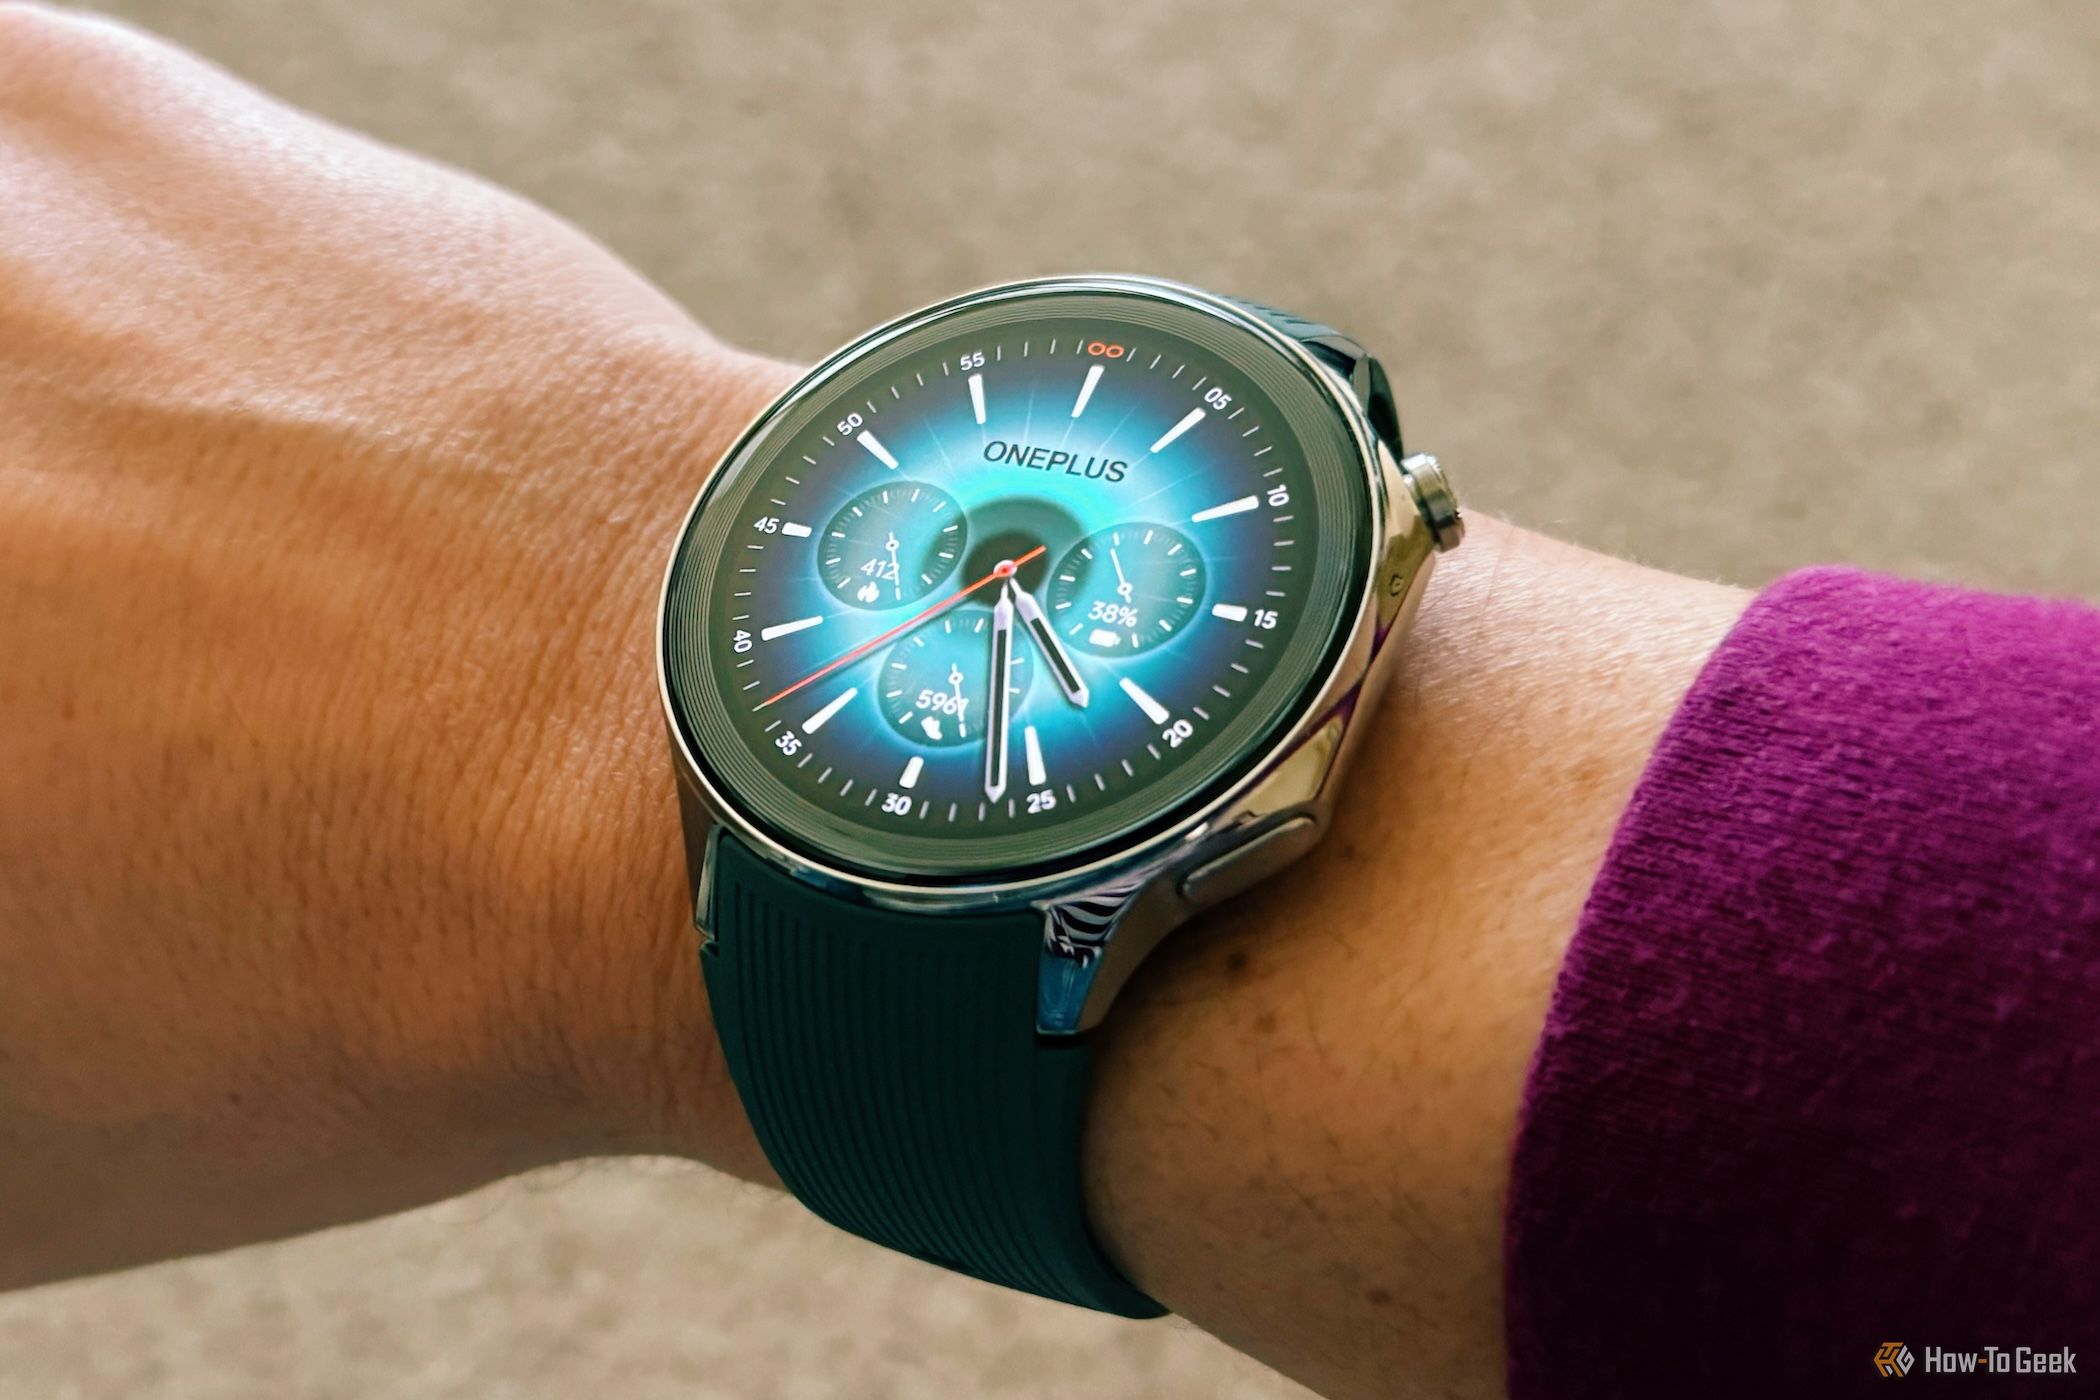 Display of the OnePlus Watch 2 on someone's wrist